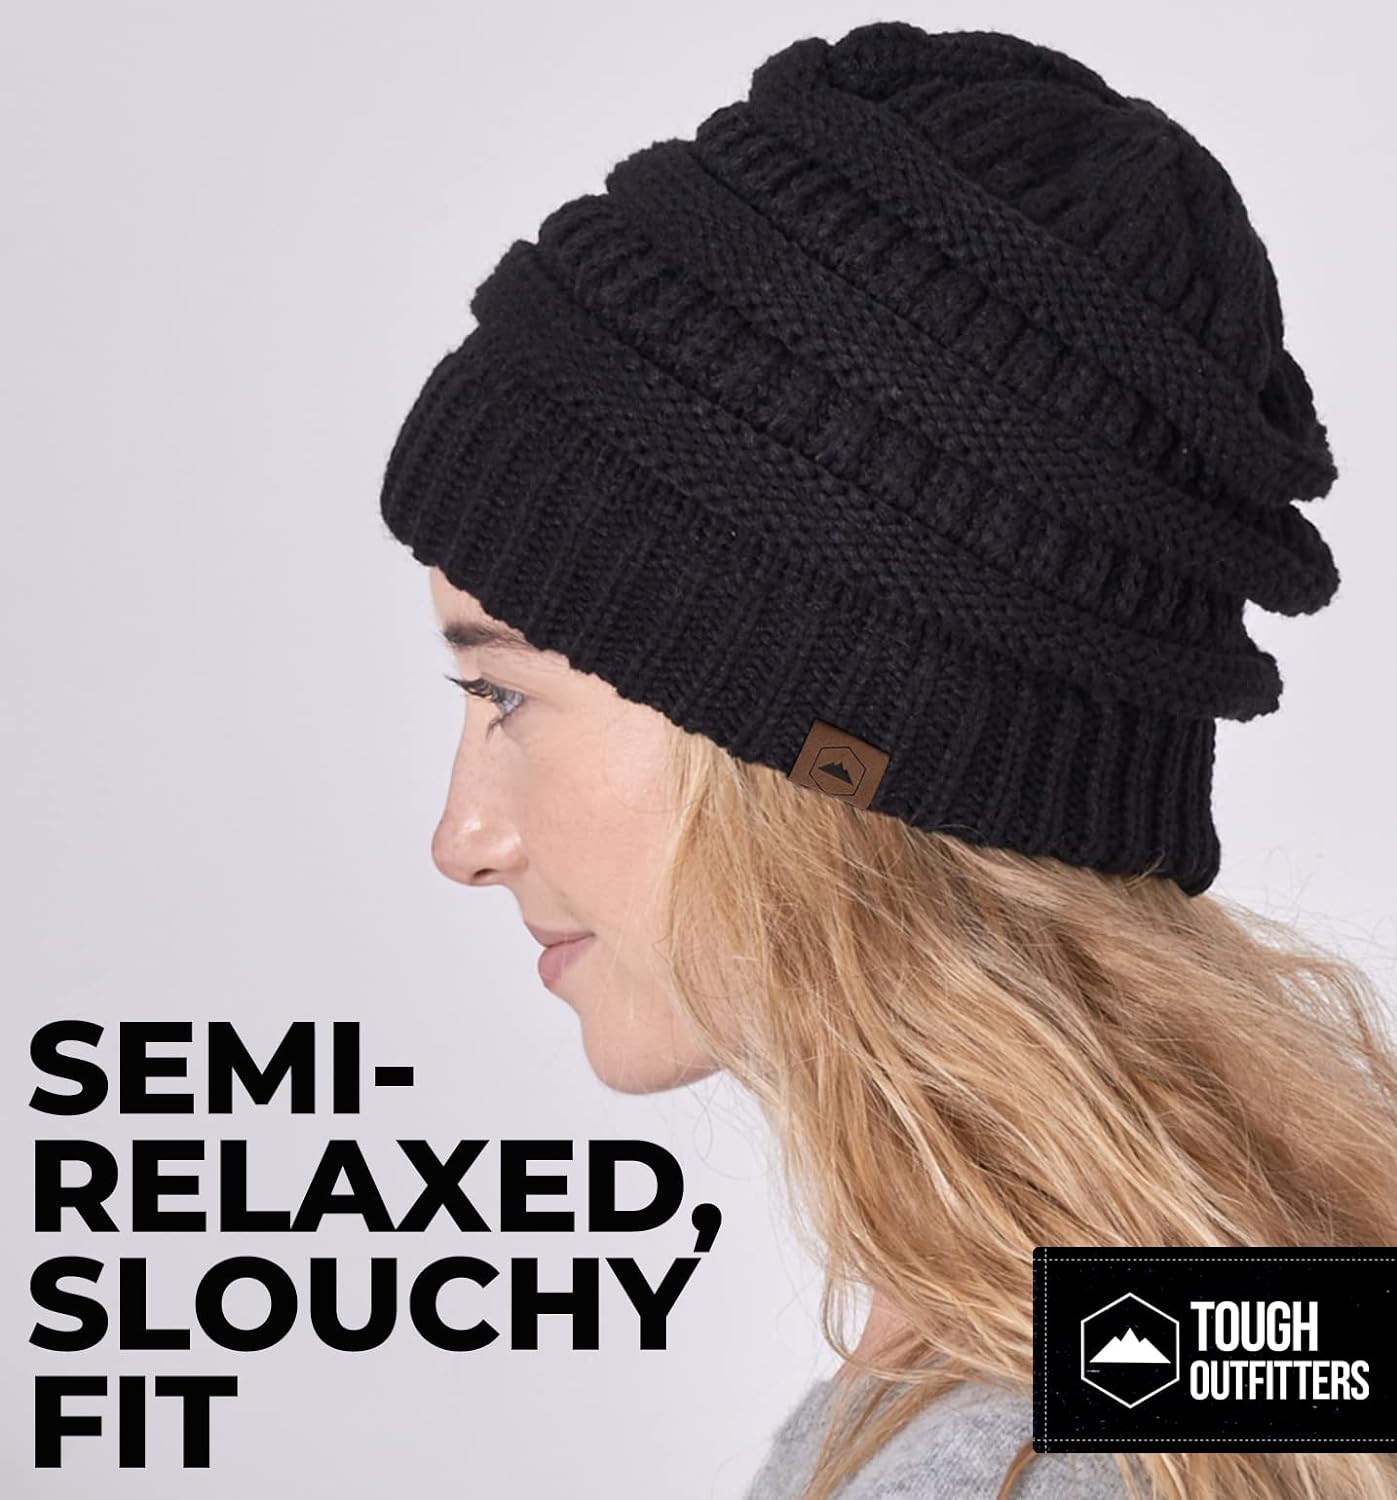 CLEARANCE SALE! Thick Short Clabe Knit Beanie Winter Ski Hat Skull Cap 